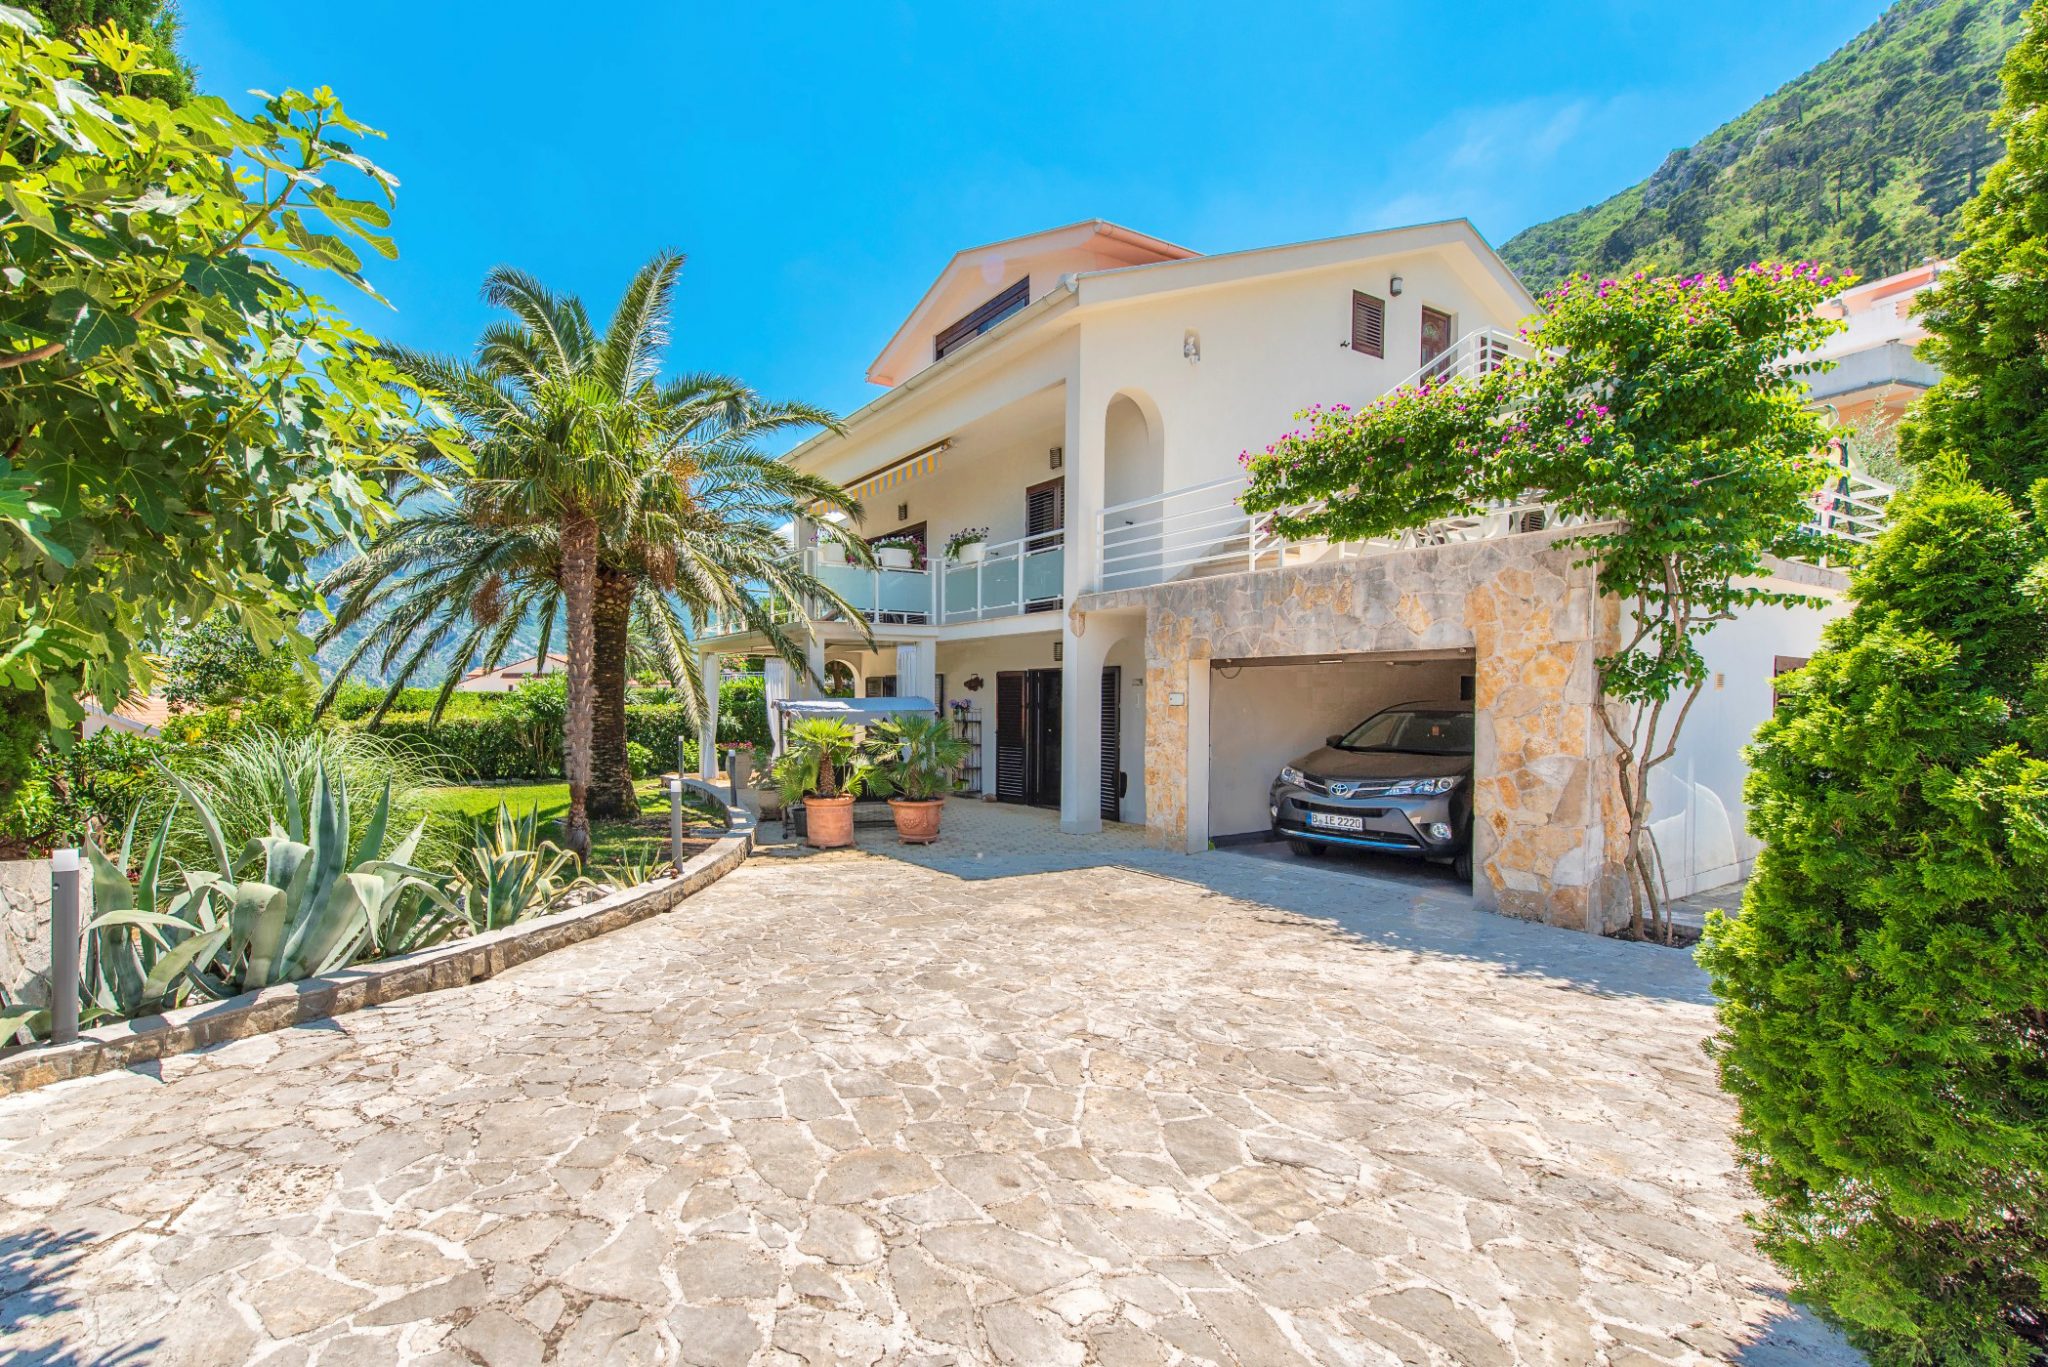 Kotor, Prcanj – a house with a sea view and a landscaped garden